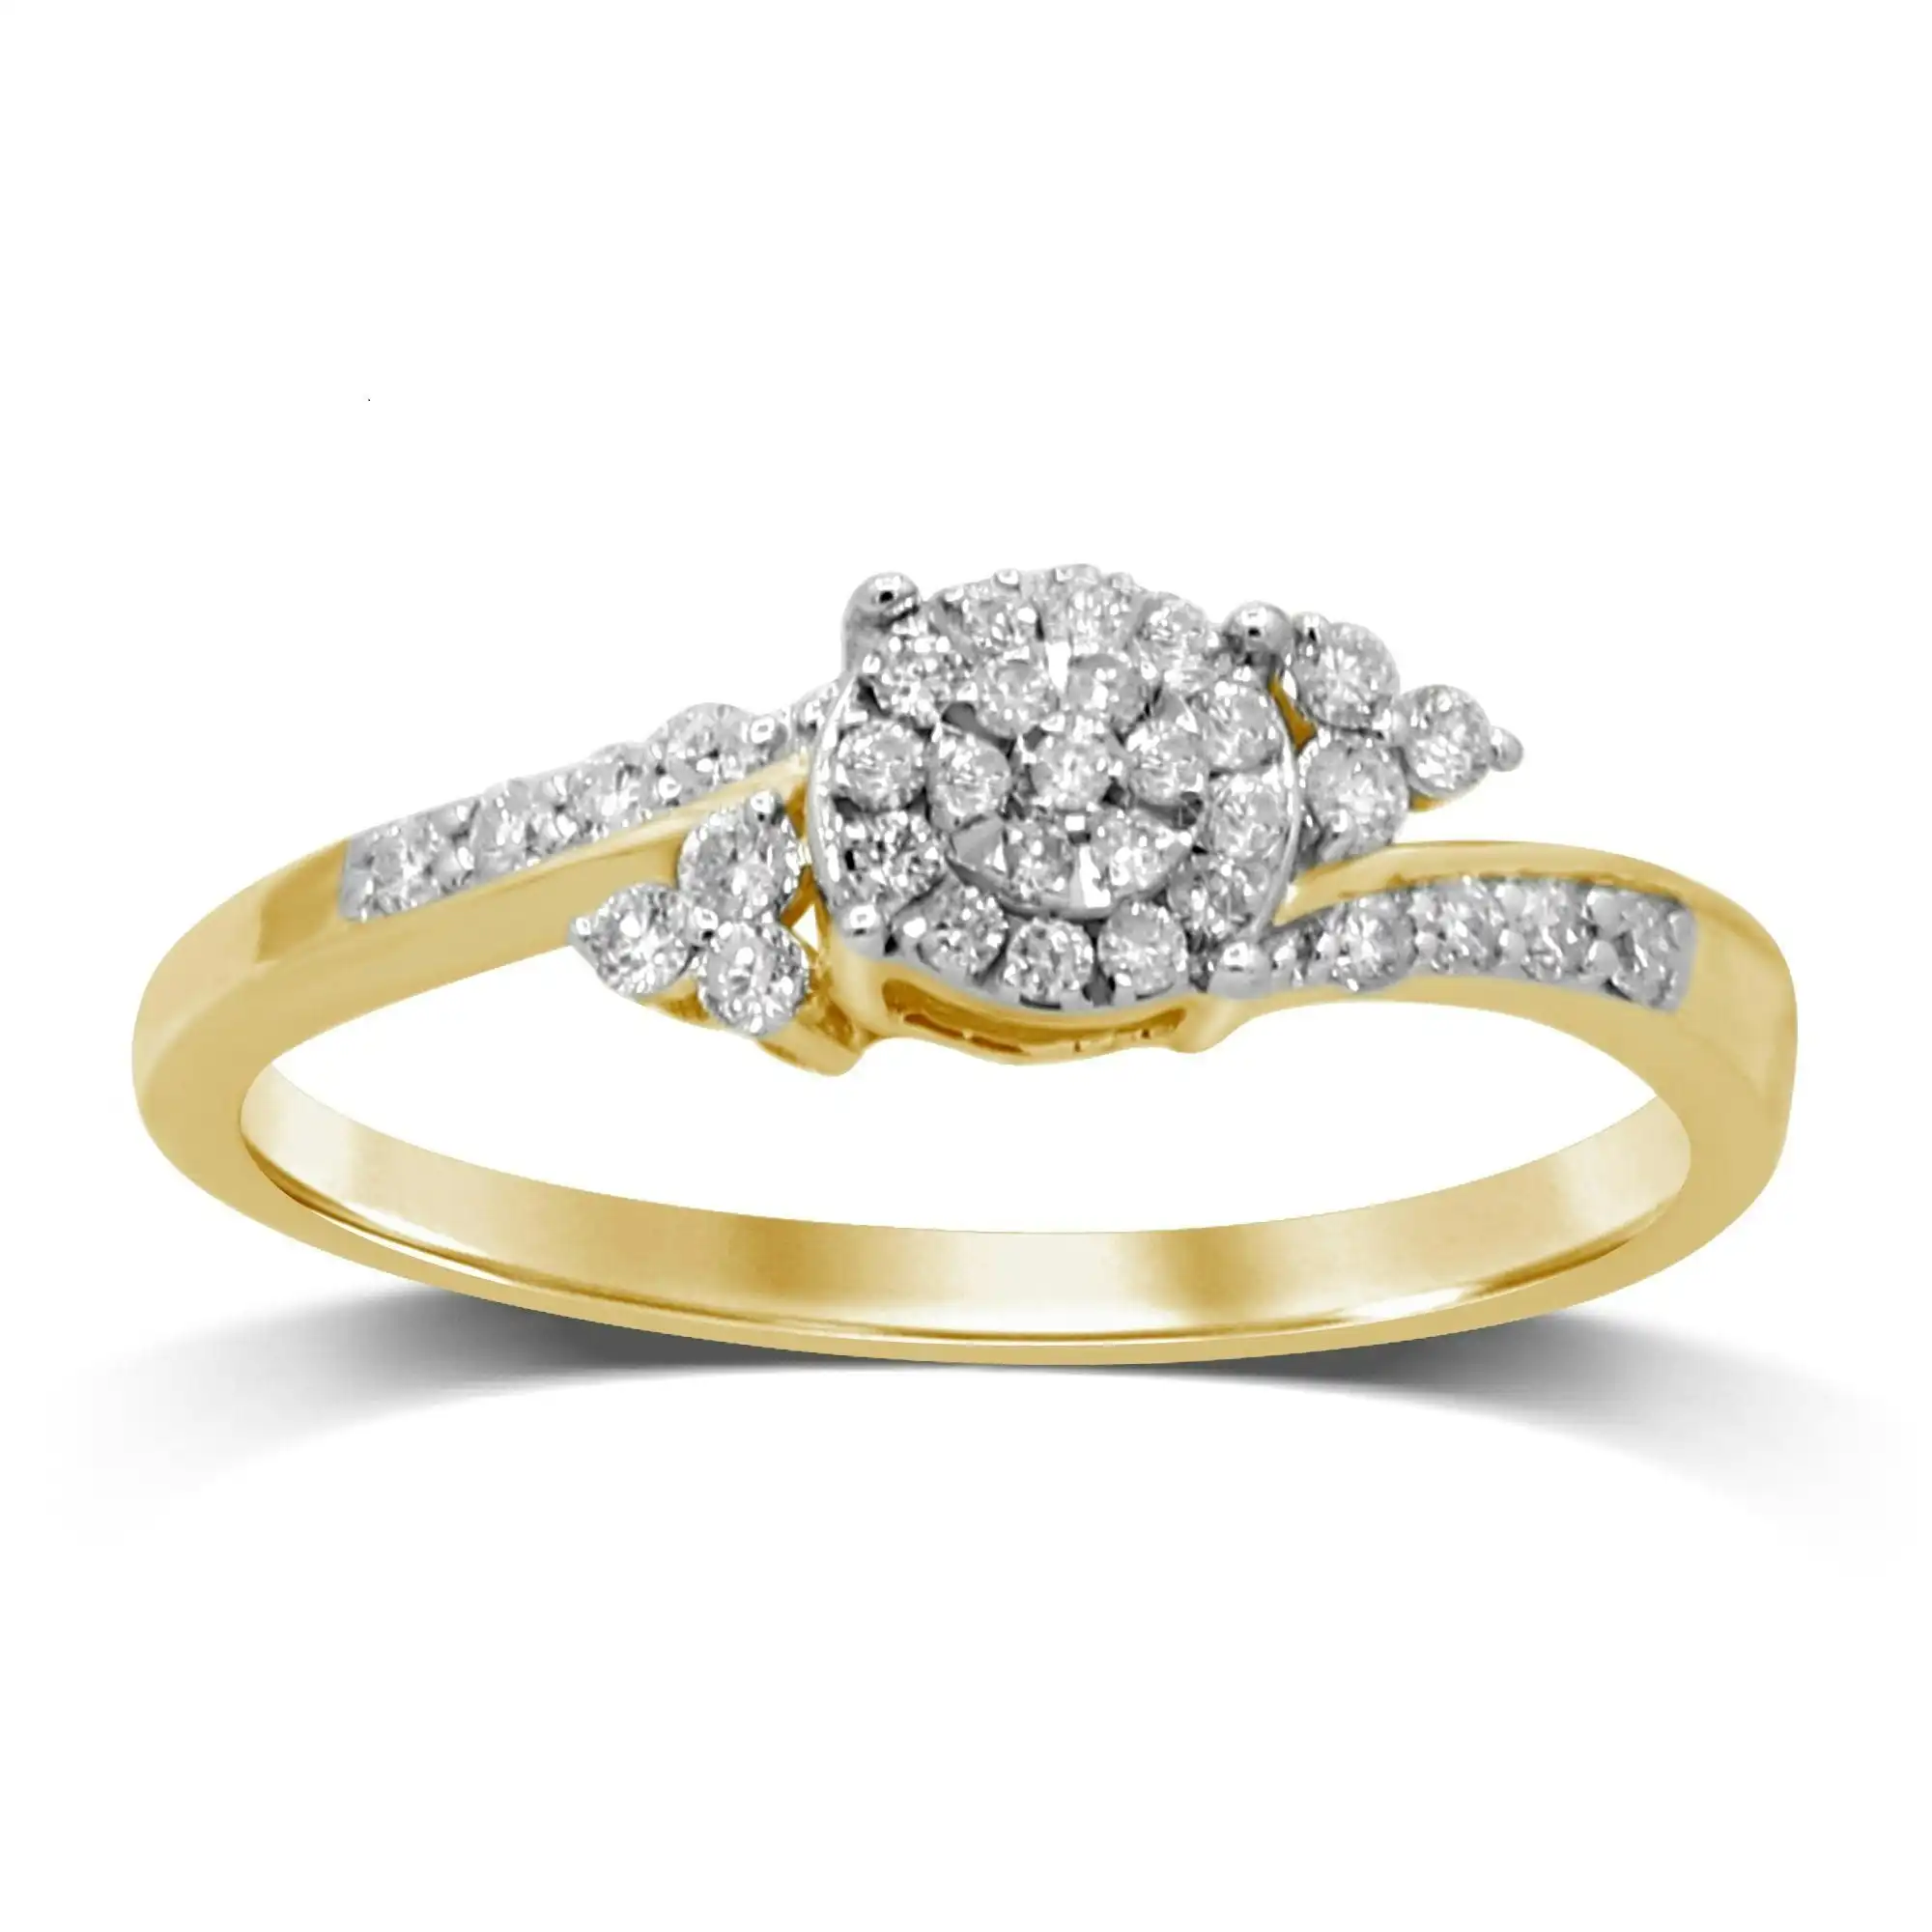 Brilliant Illusion Ring with 1/5ct of Diamonds in 9ct Yellow Gold